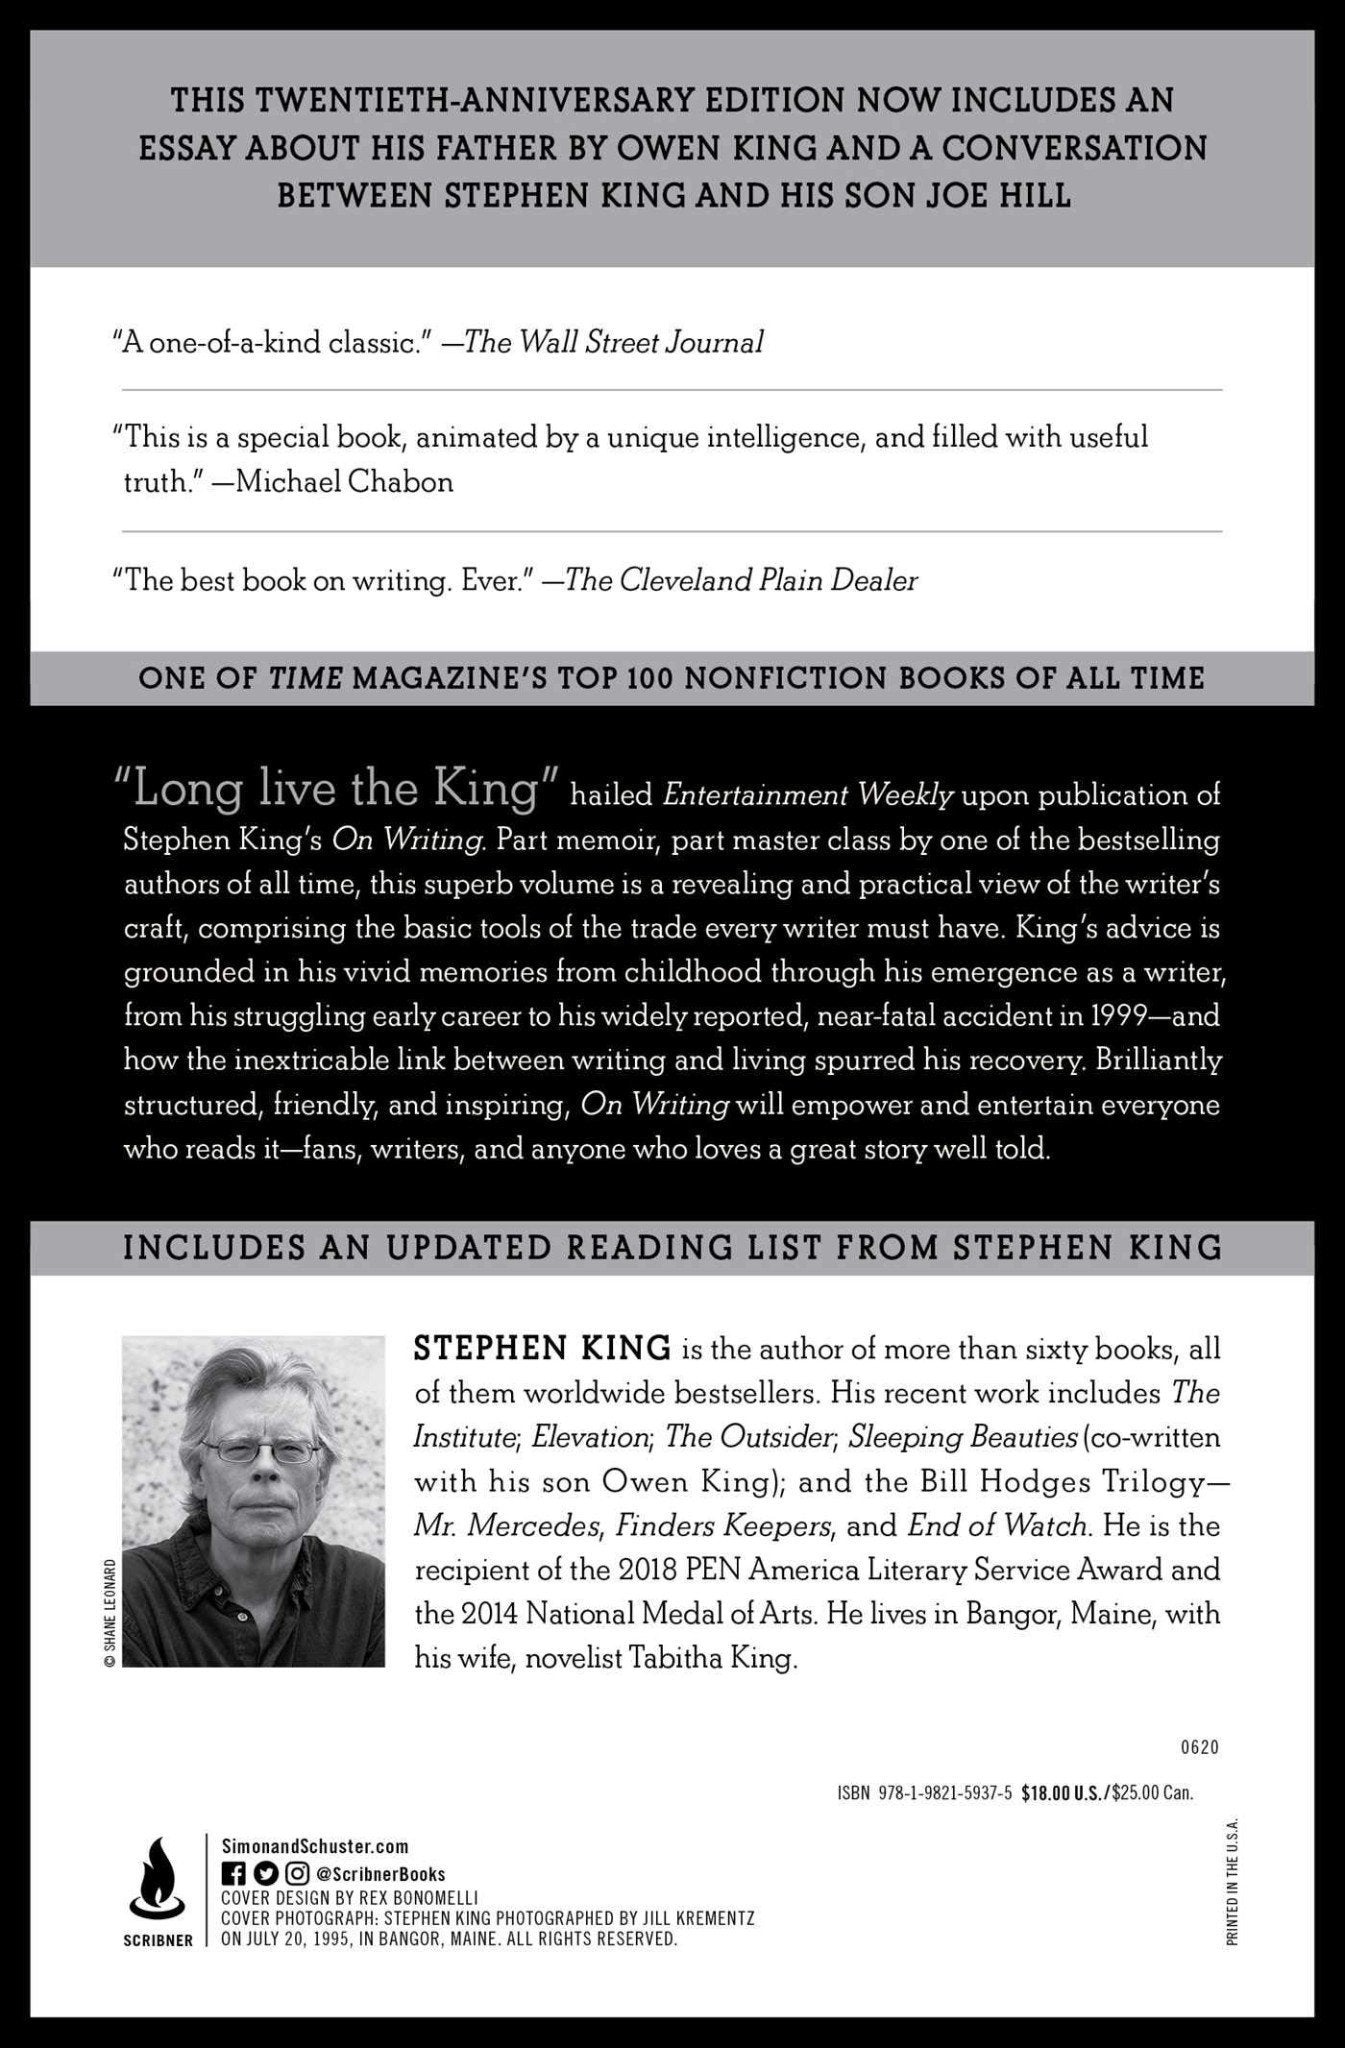 On Writing: A Memoir of the Craft by Stephen King (Paperback) 20th Anniversary - LV'S Global Media